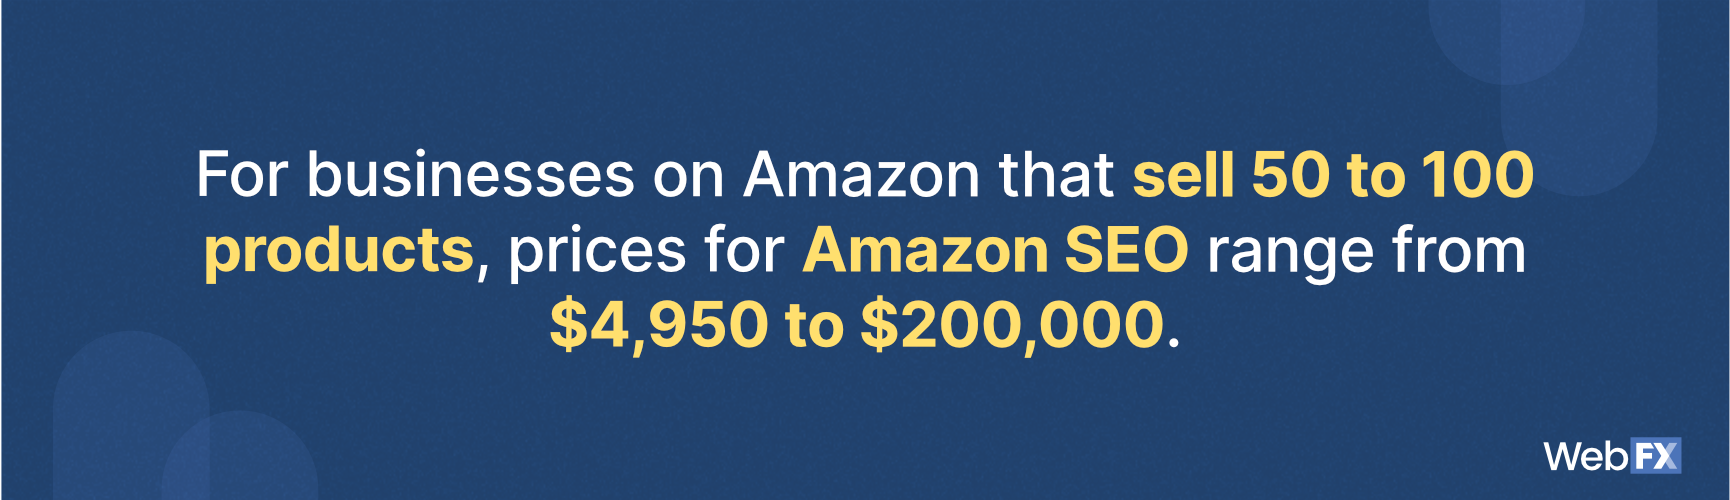 Amazon SEO pricing for businesses that sell 50 to 100 products